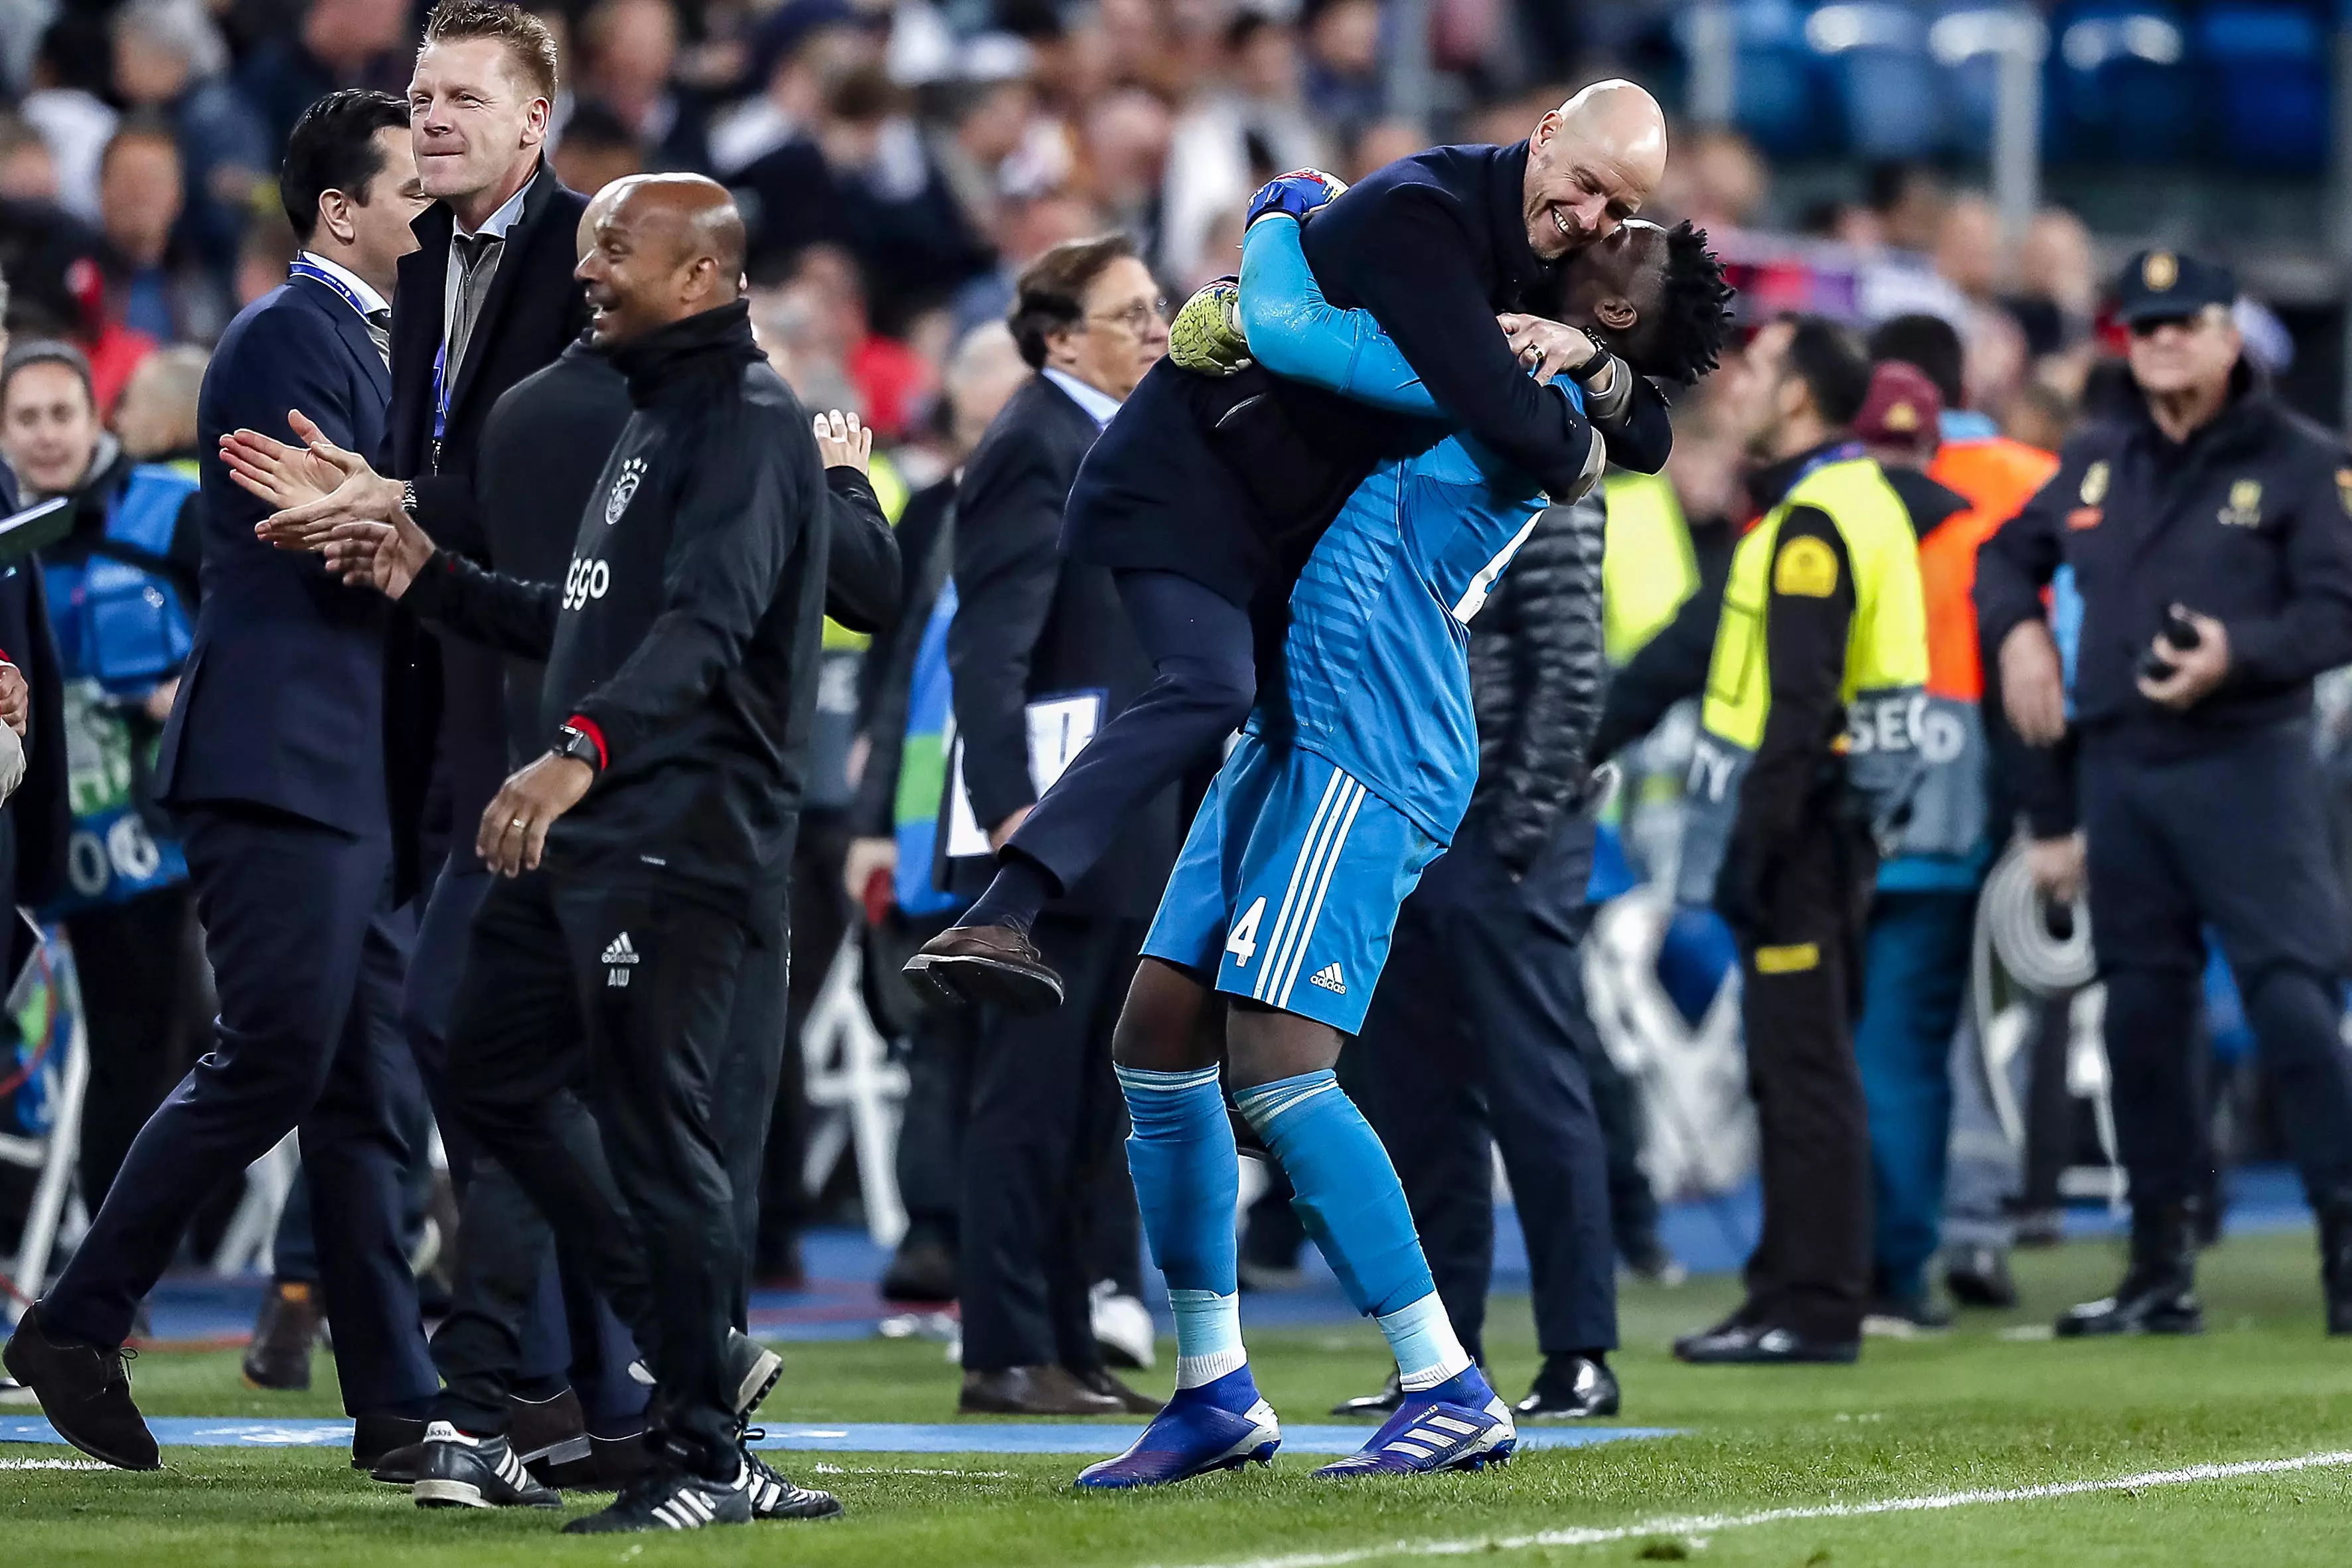 Ten Hag celebrates with Andre Onana after beating Real Madrid away in 2019. Image: PA Images